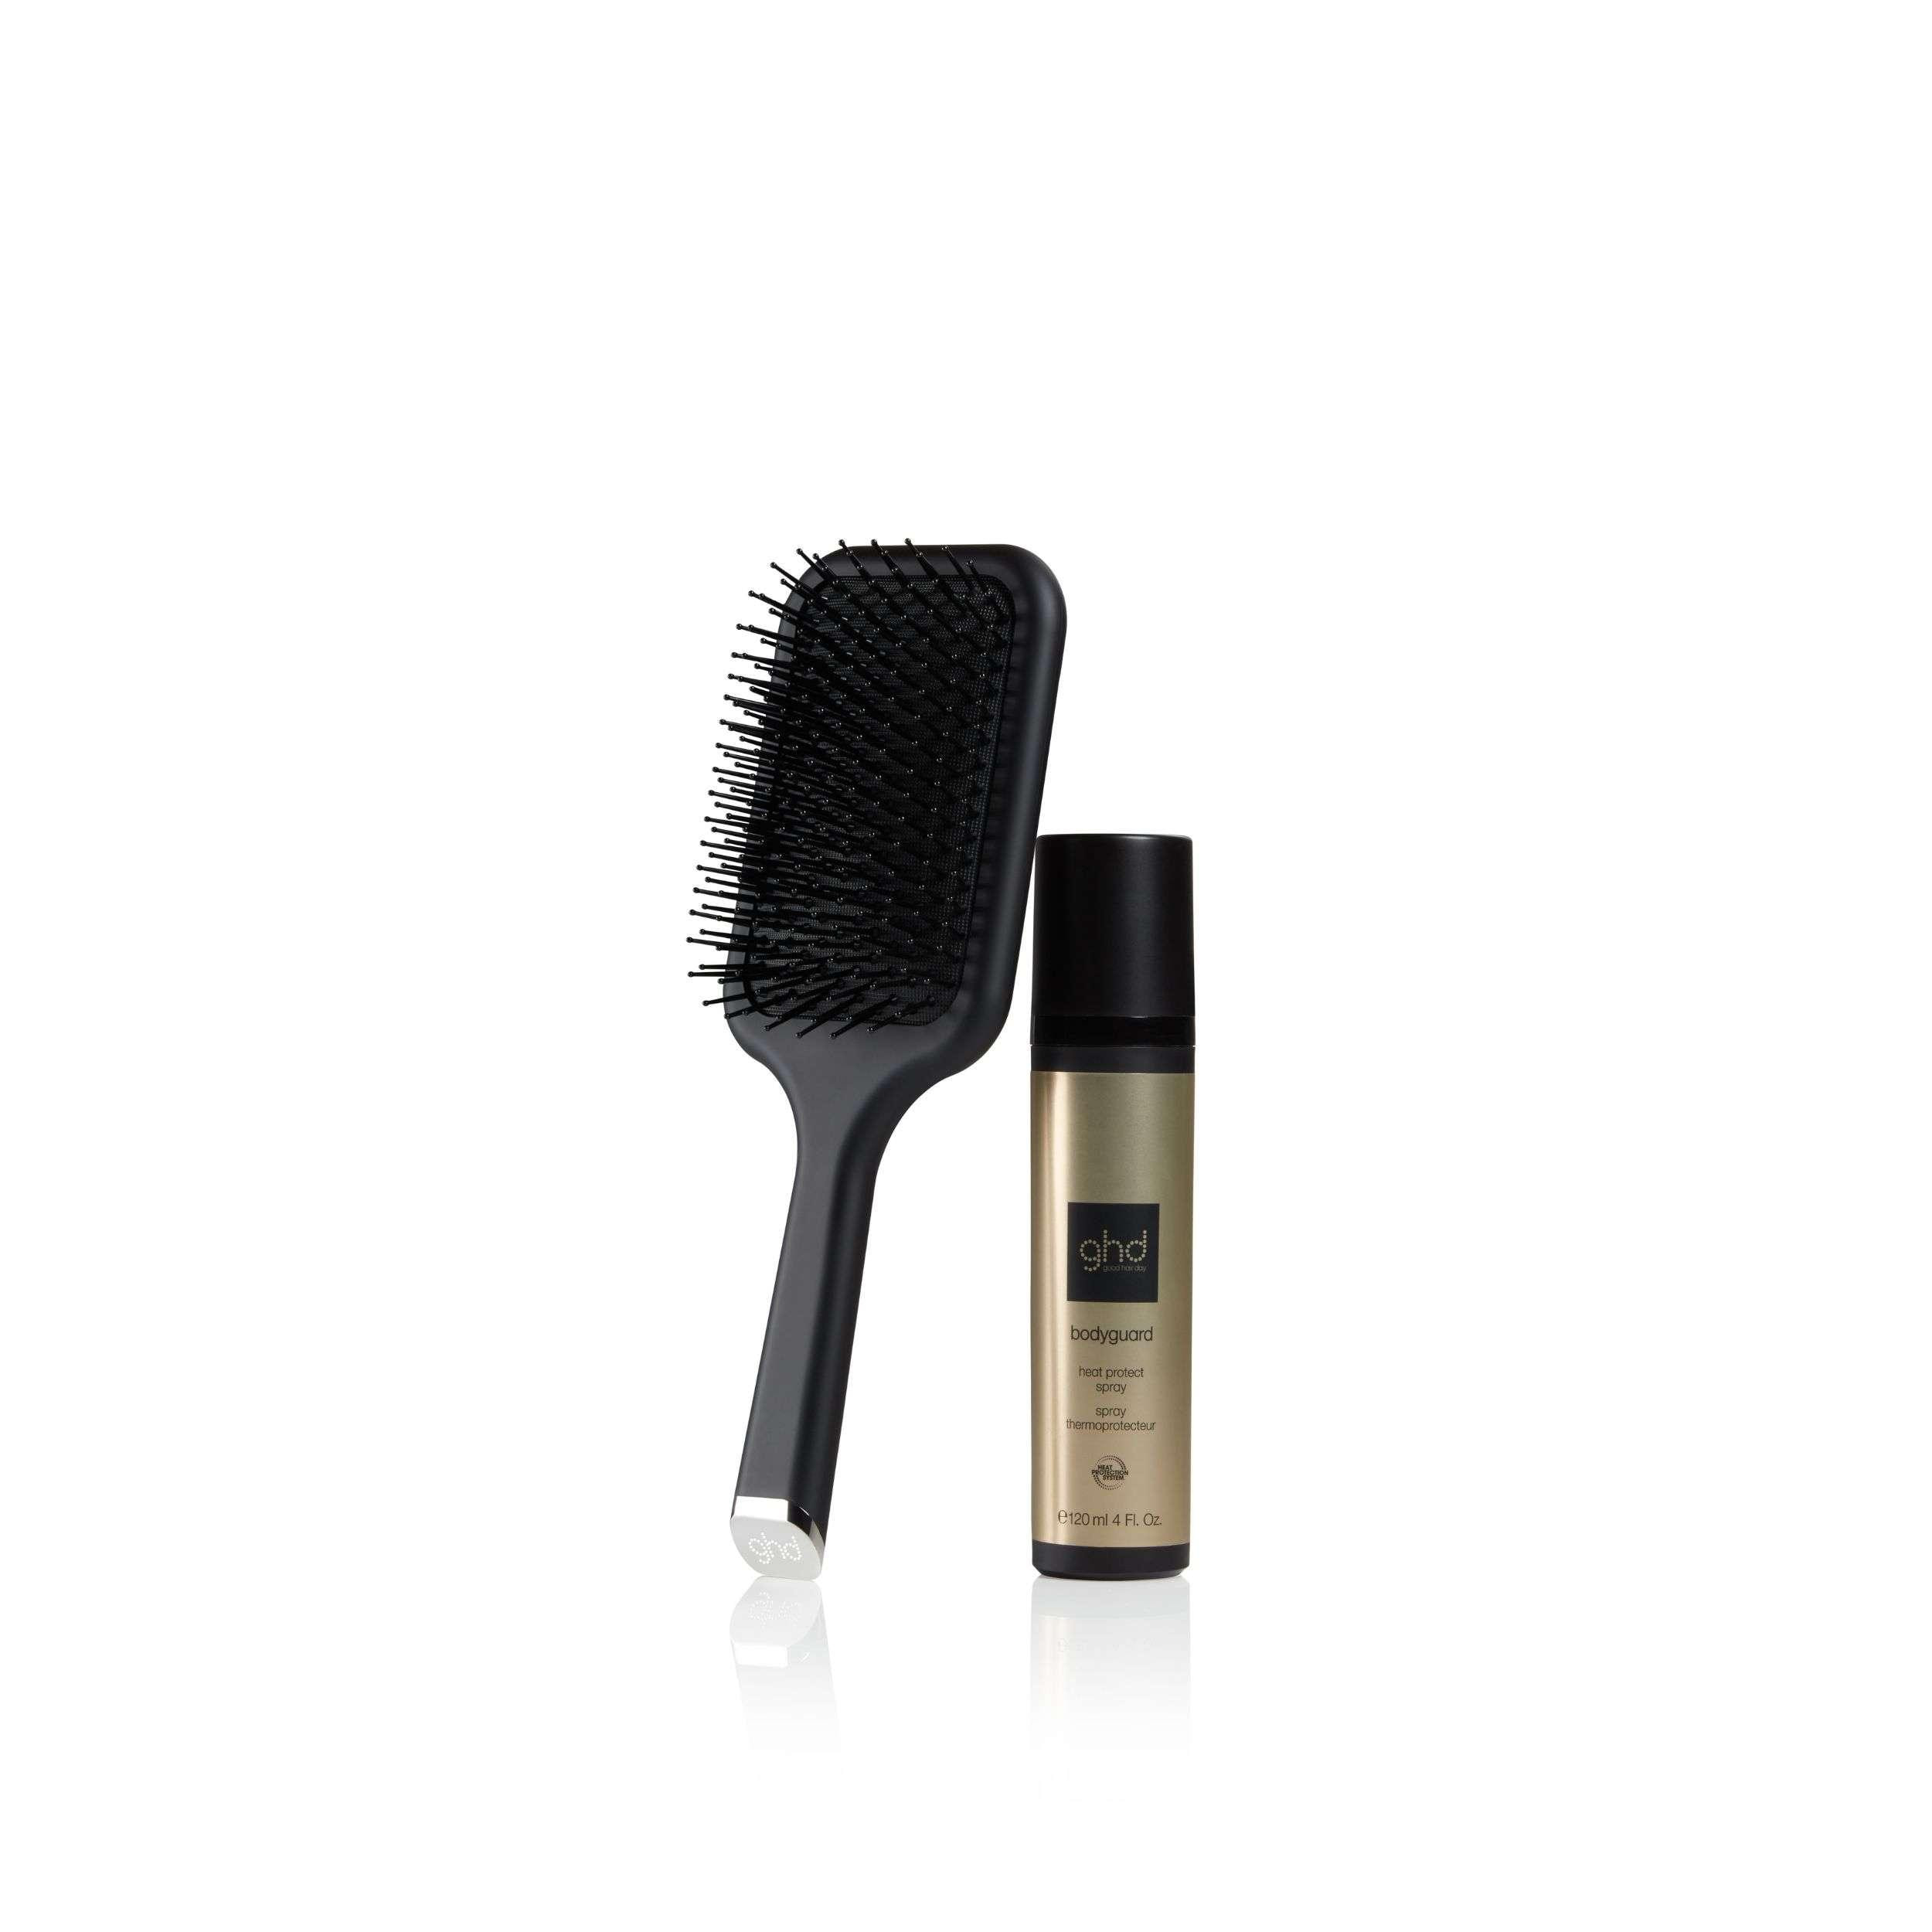 image-Coffret Duo Coiffage - Brosse et Spray thermoprotecteur ghd